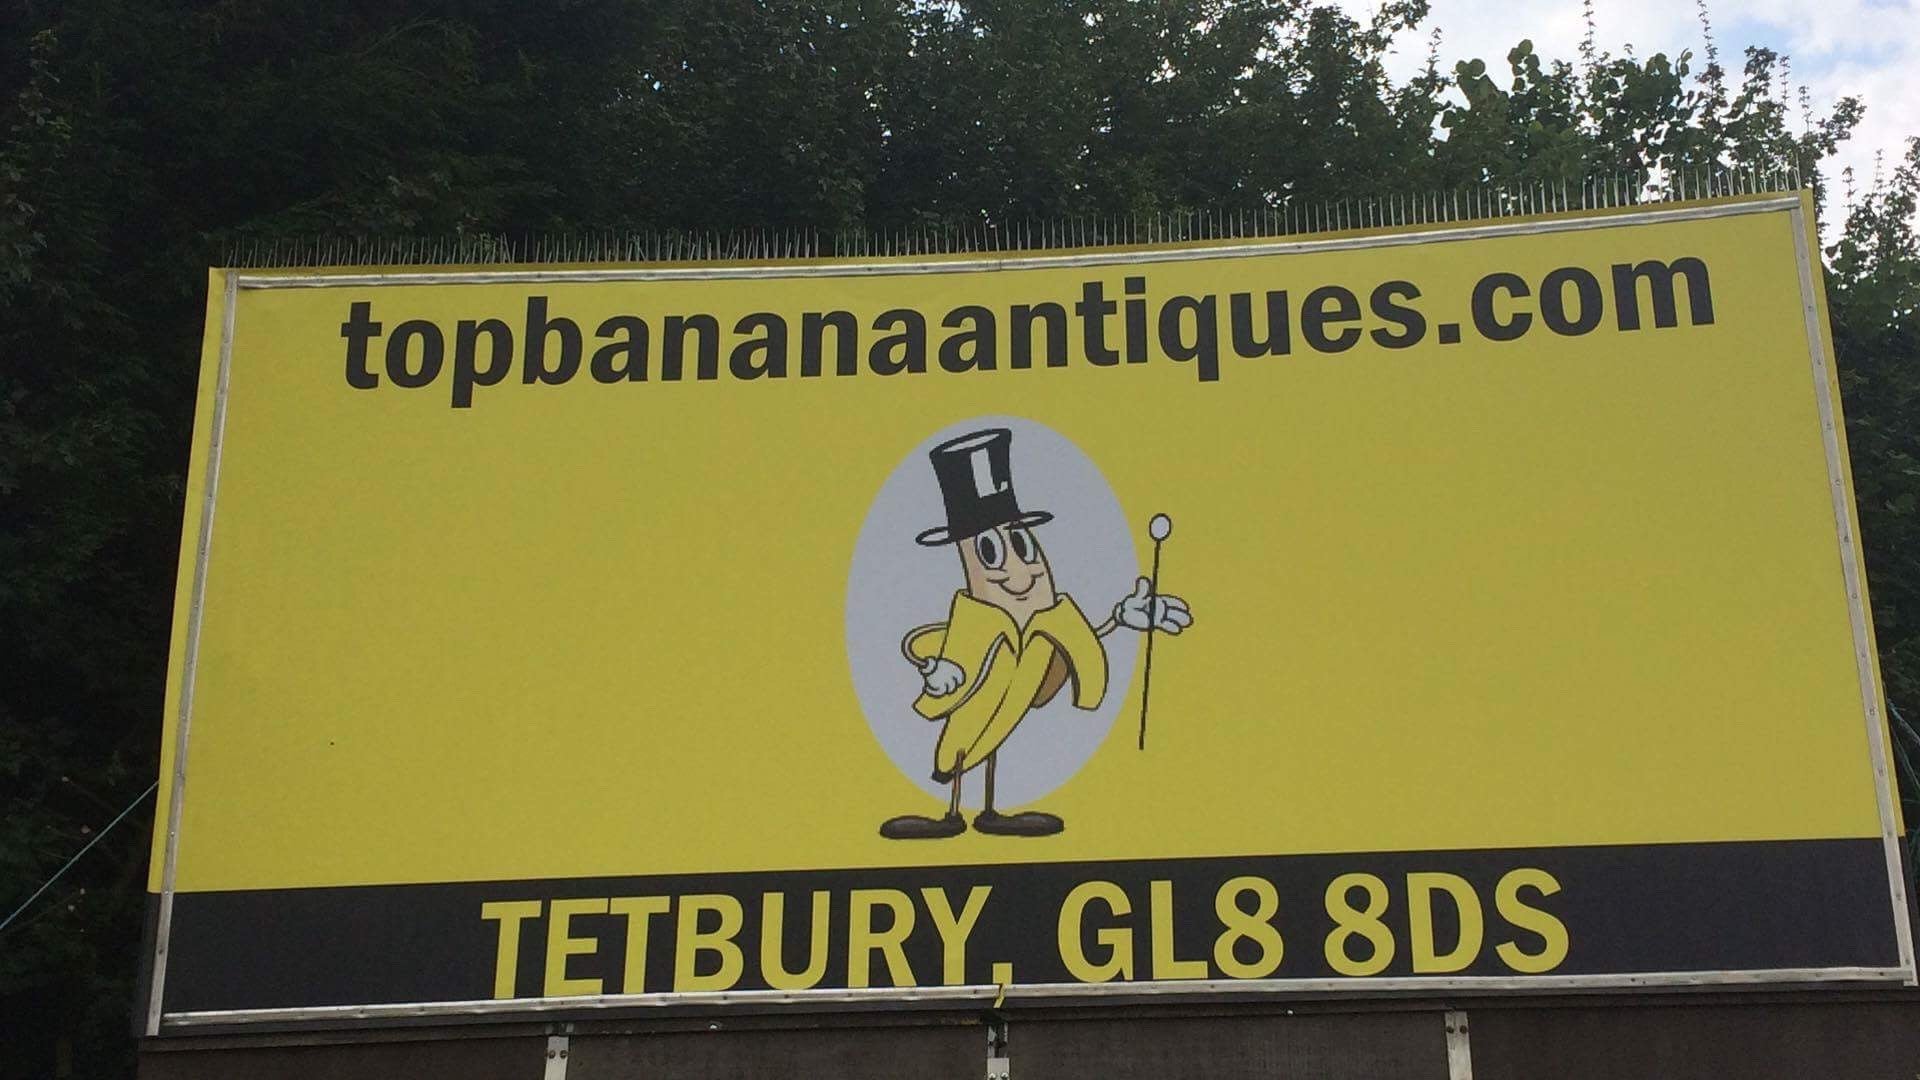 Let us know if you see Bertie the Banana Man out and about!